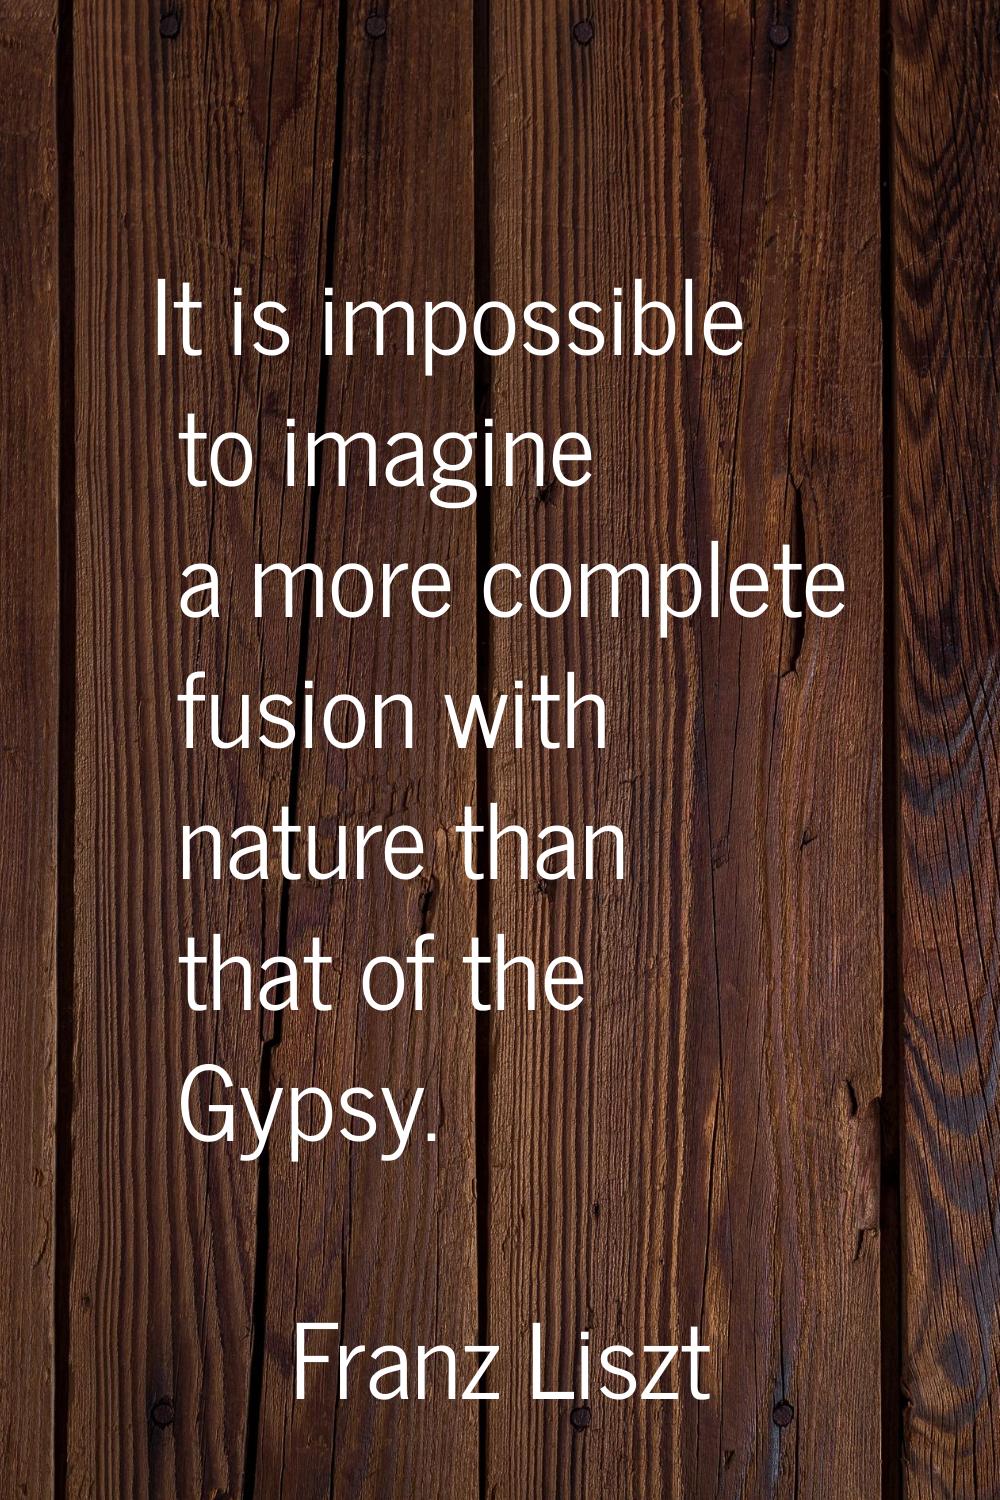 It is impossible to imagine a more complete fusion with nature than that of the Gypsy.